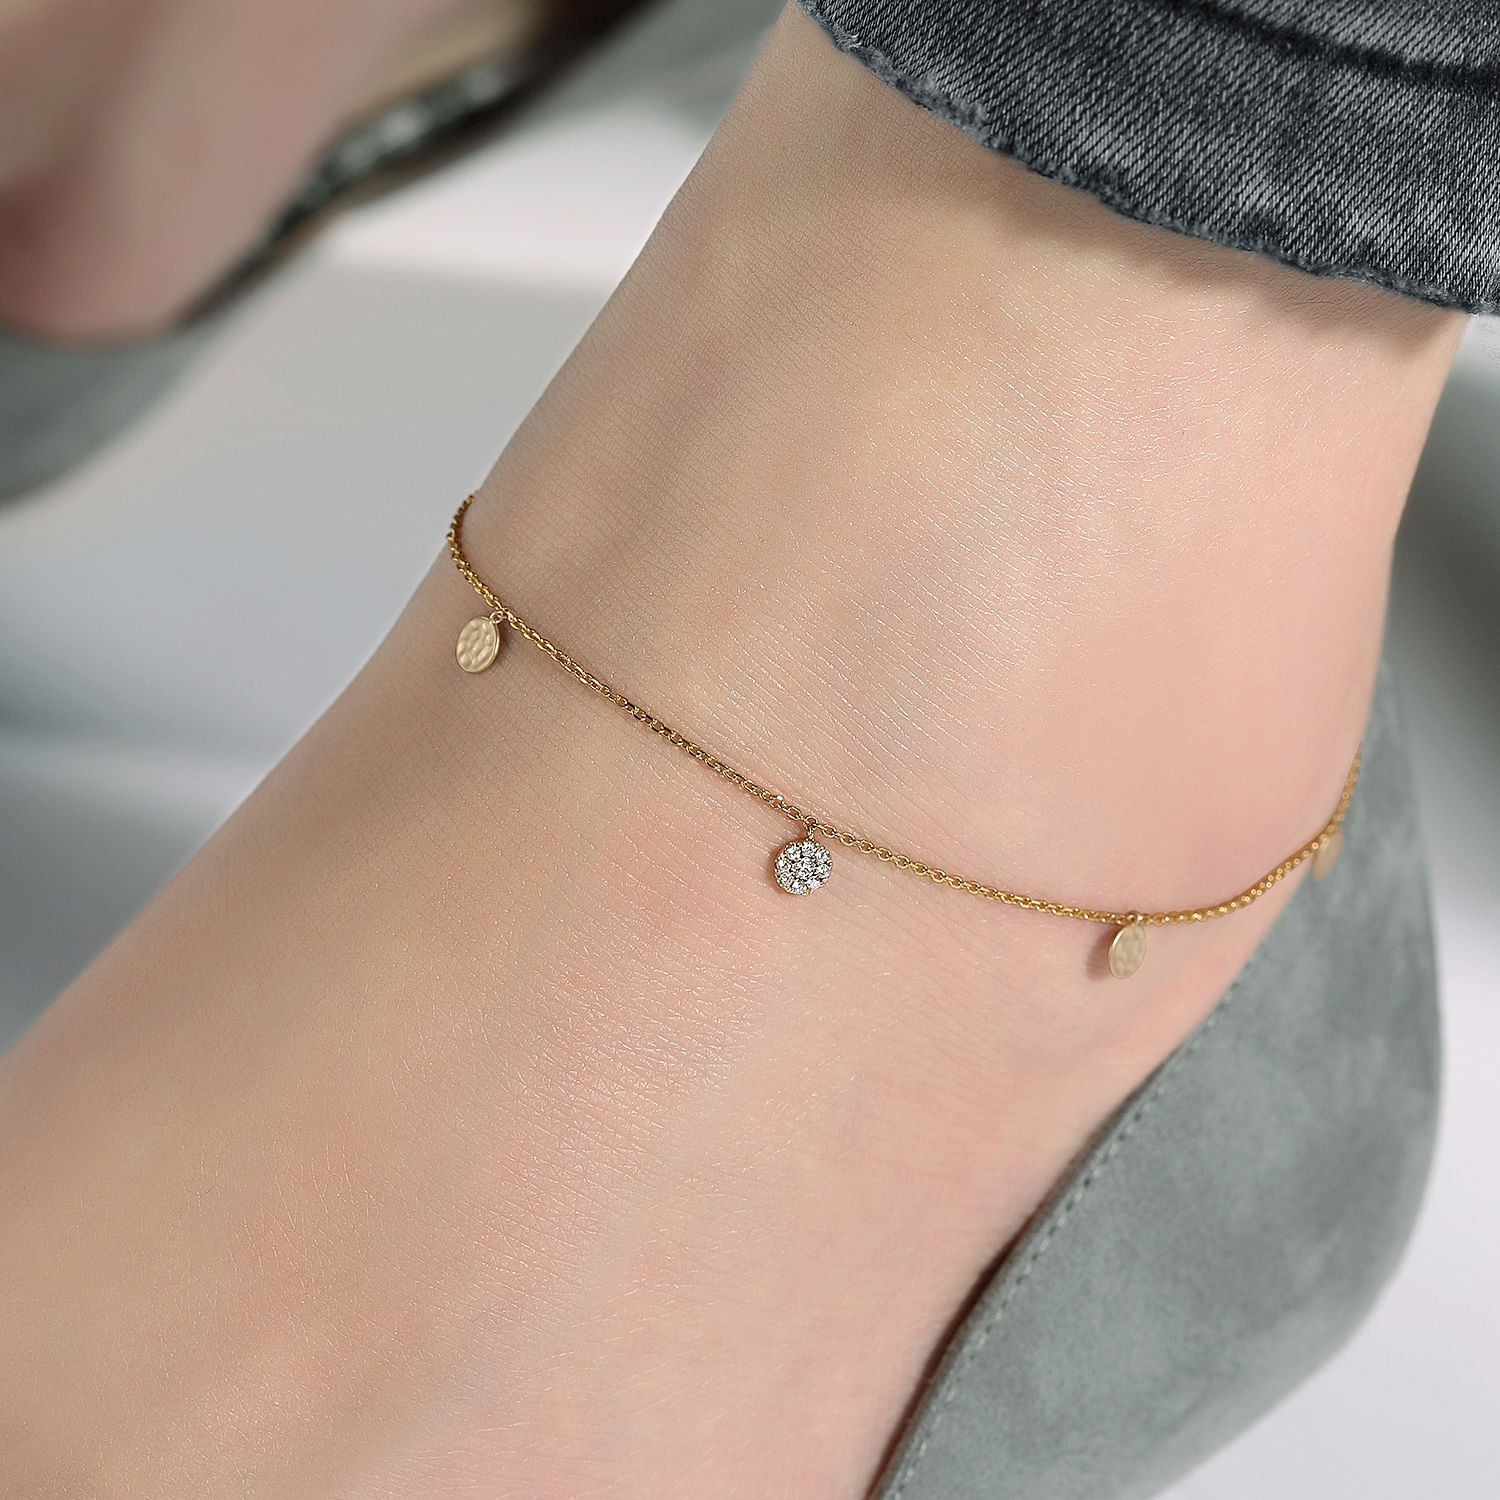 14K Yellow Gold Chain Ankle Bracelet with Round Hammered and Diamond Disc Drops